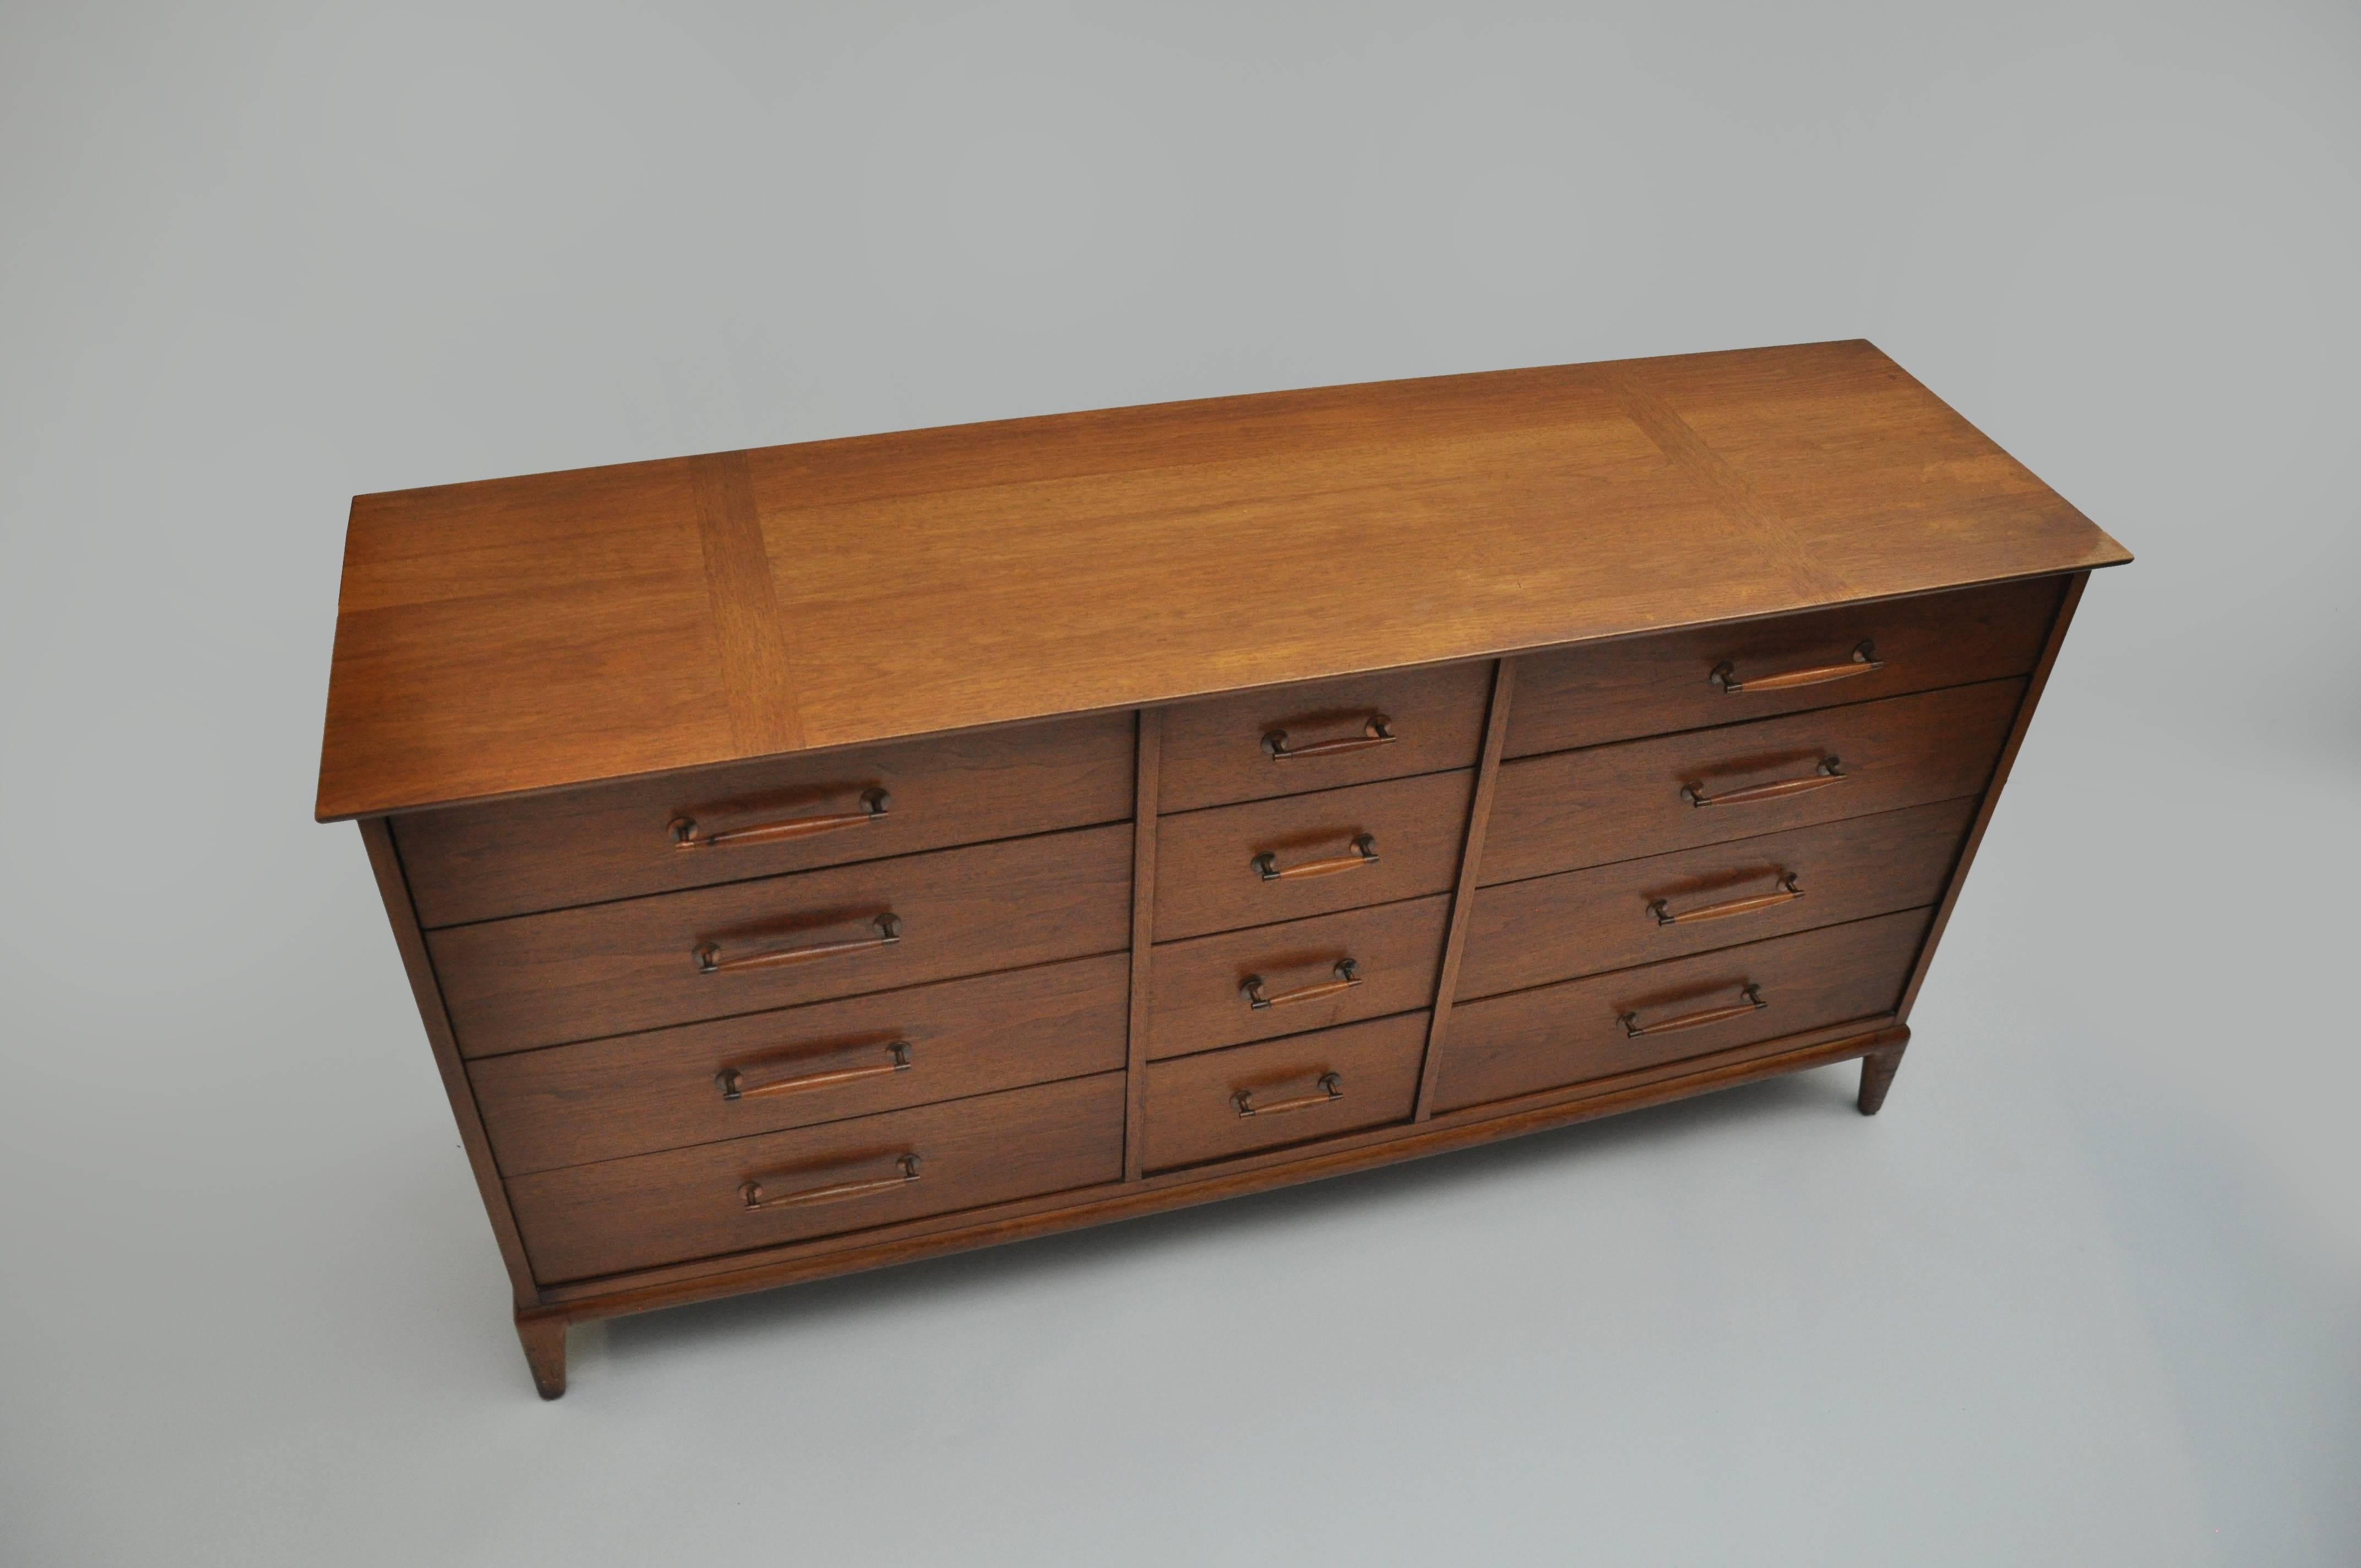 Mid-Century chest with copper and wood hardware. Chest is of walnut and has 12 drawers. Original brochure is in image three. Could be used as a credenza.